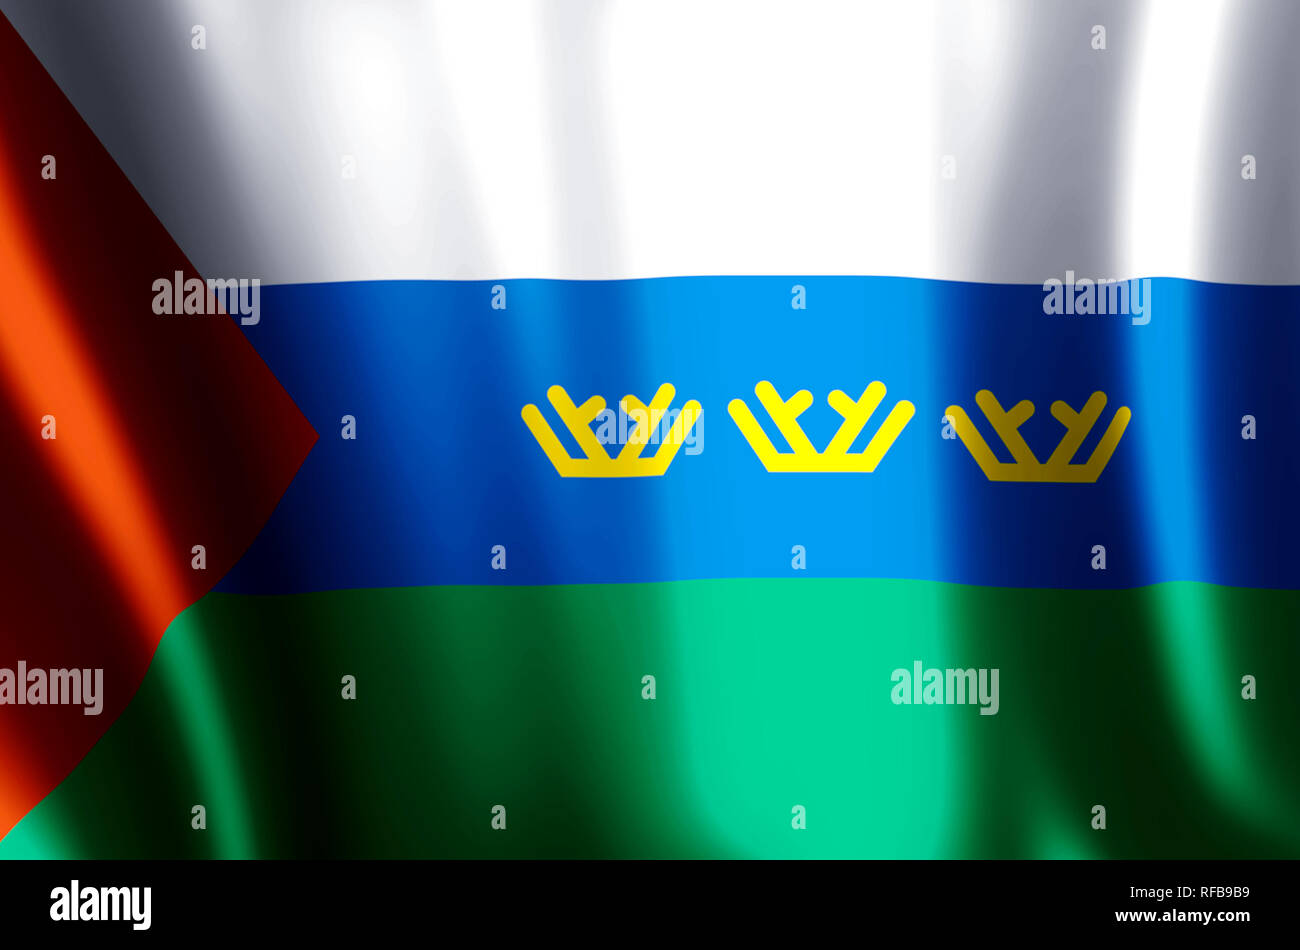 Tyumen Stylish Waving And Closeup Flag Illustration Perfect For Background Or Texture Purposes 6554